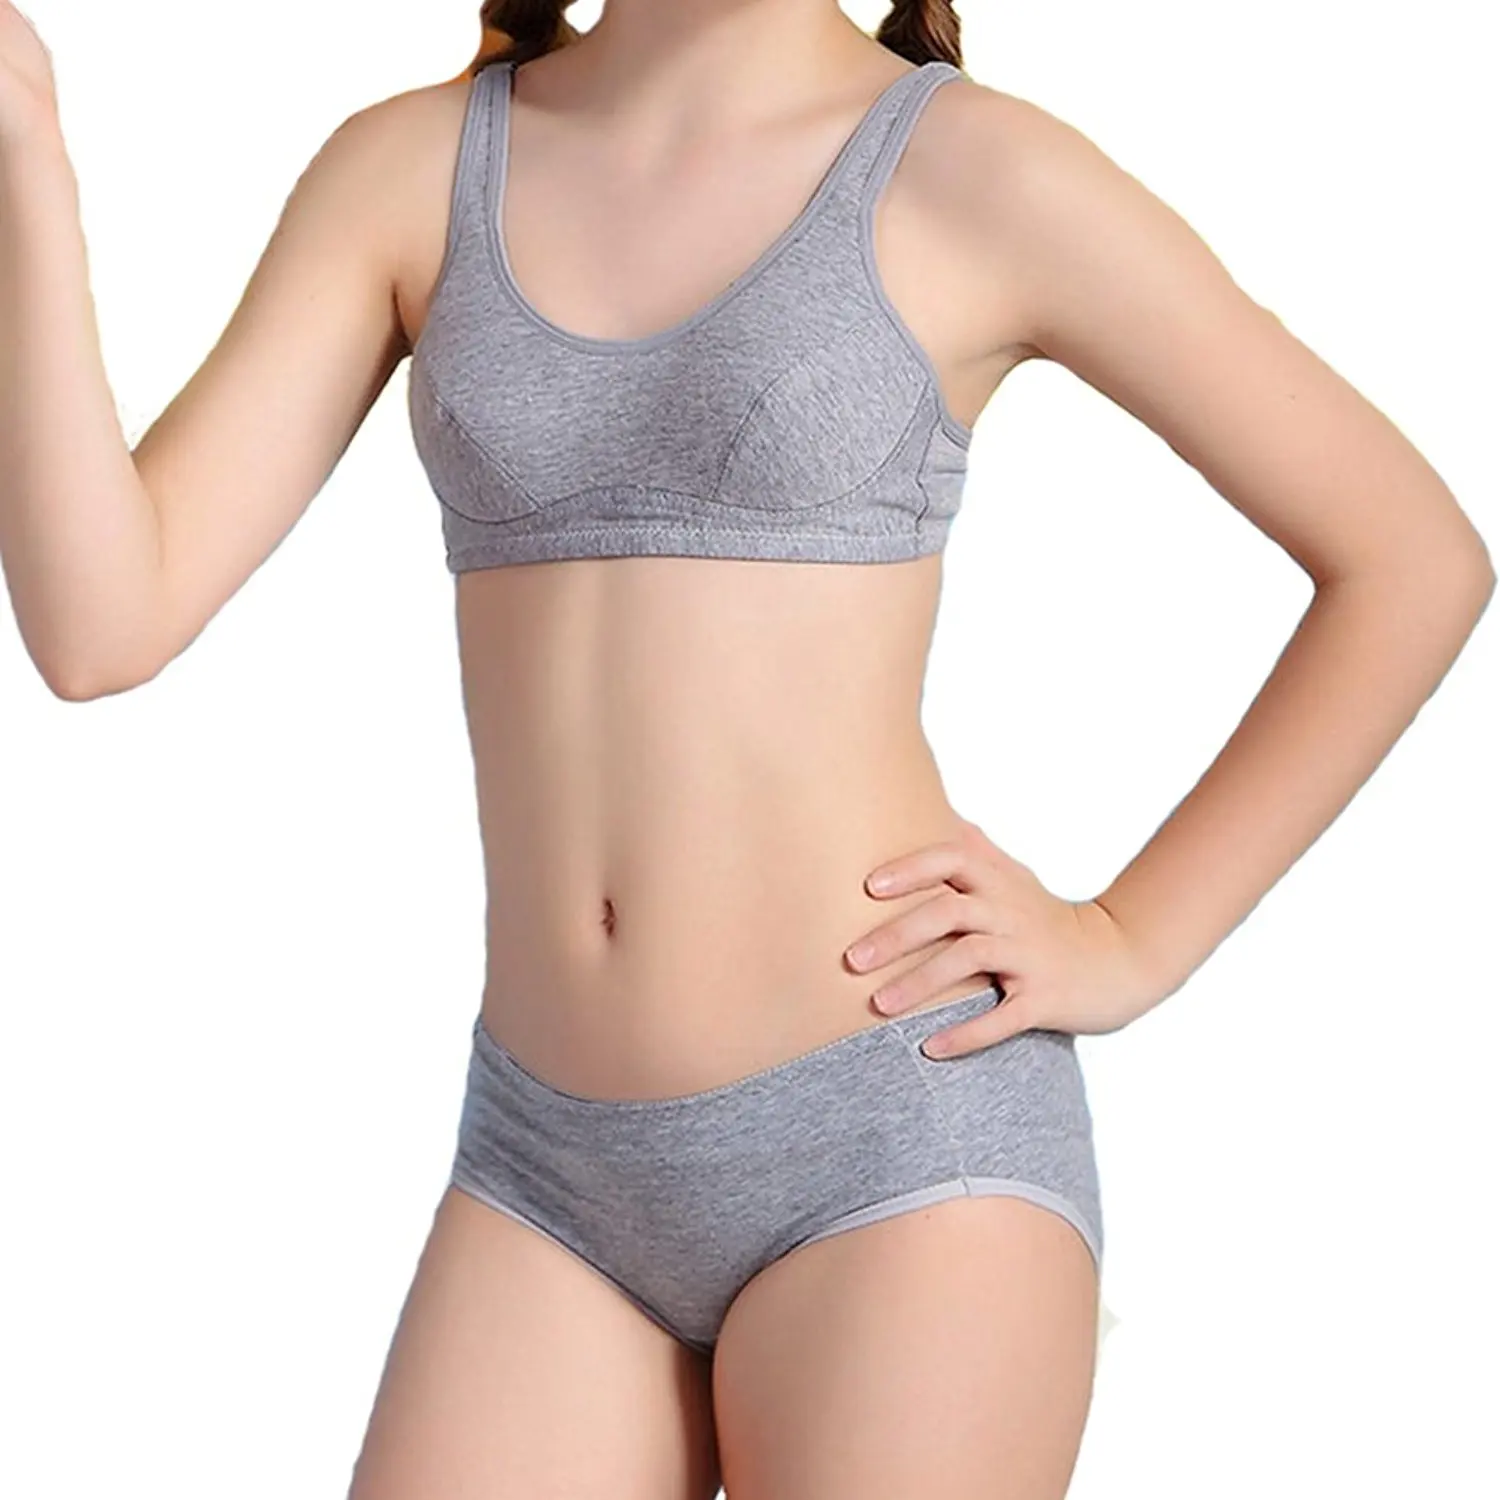 Buy VictorySweety Big Girls Padded Bras and Matching Pants Sets Kids  Training Underwear in Cheap Price on Alibaba.com